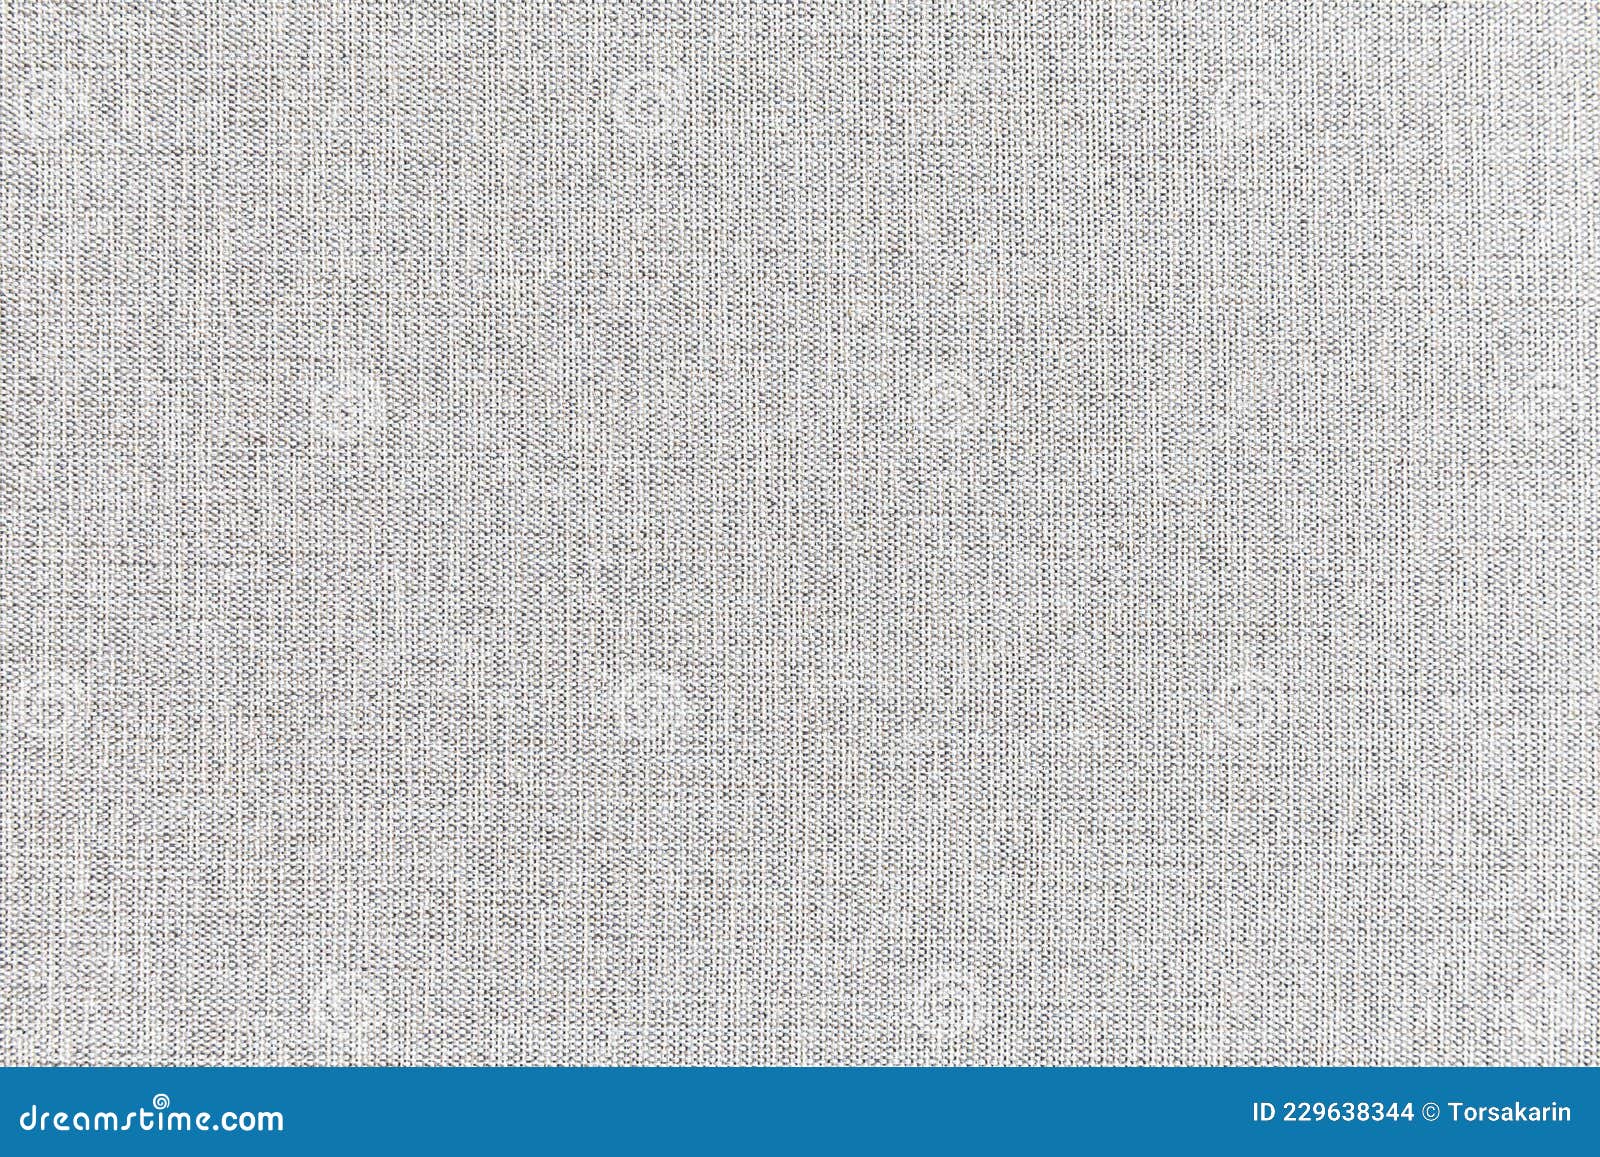 Linen Texture and Background Seamless or White Fabric Texture Stock ...